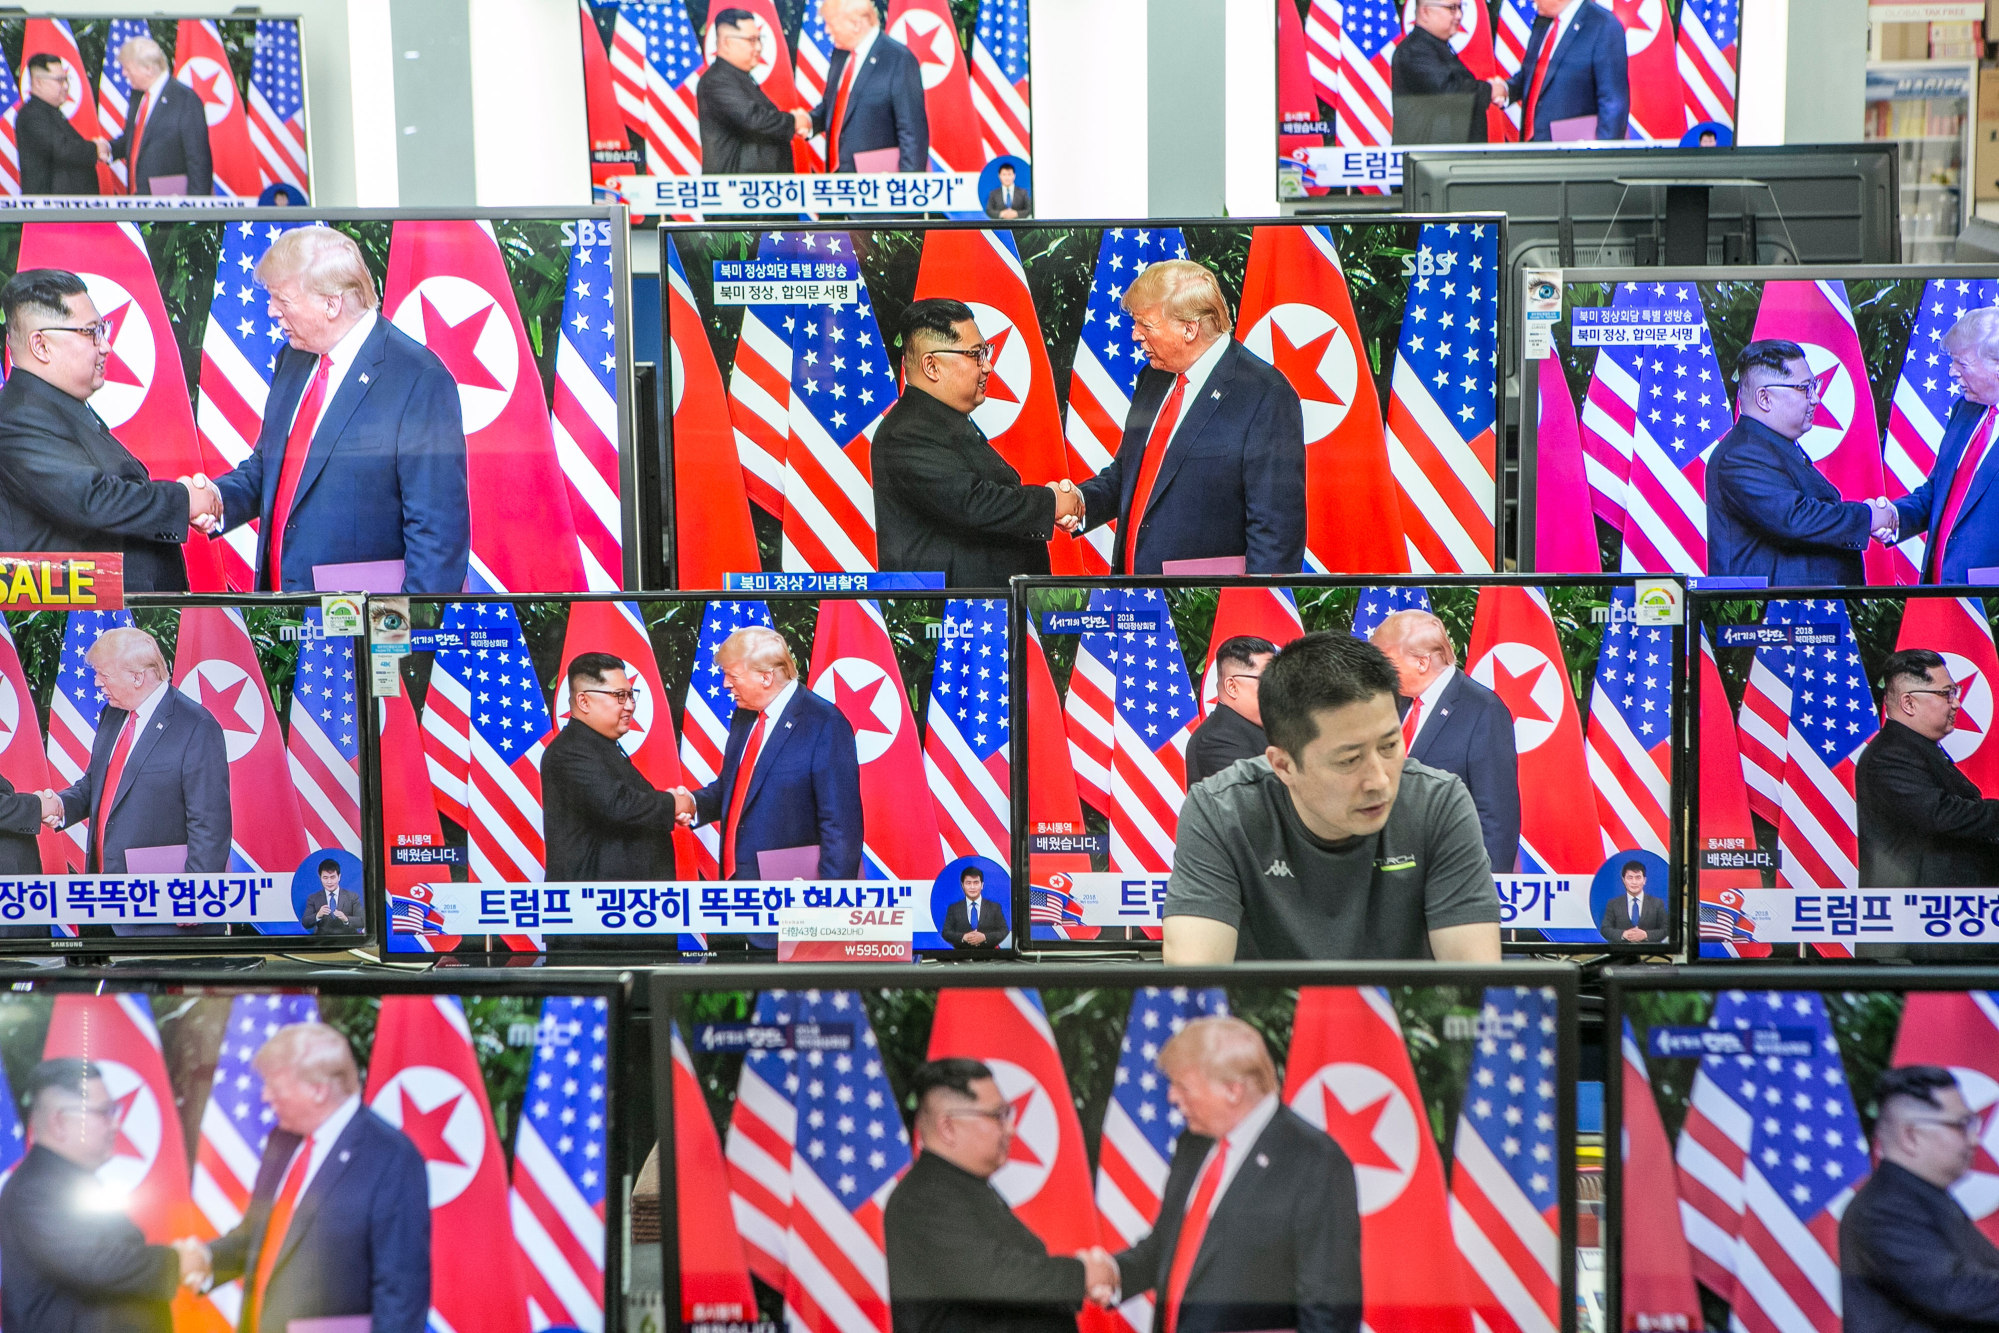 A news broadcast of Donald Trump and Kim Jong Un shaking hands following a document-signing event in Singapore, in an electronics store in Seoul, in&nbsp;June 2018.